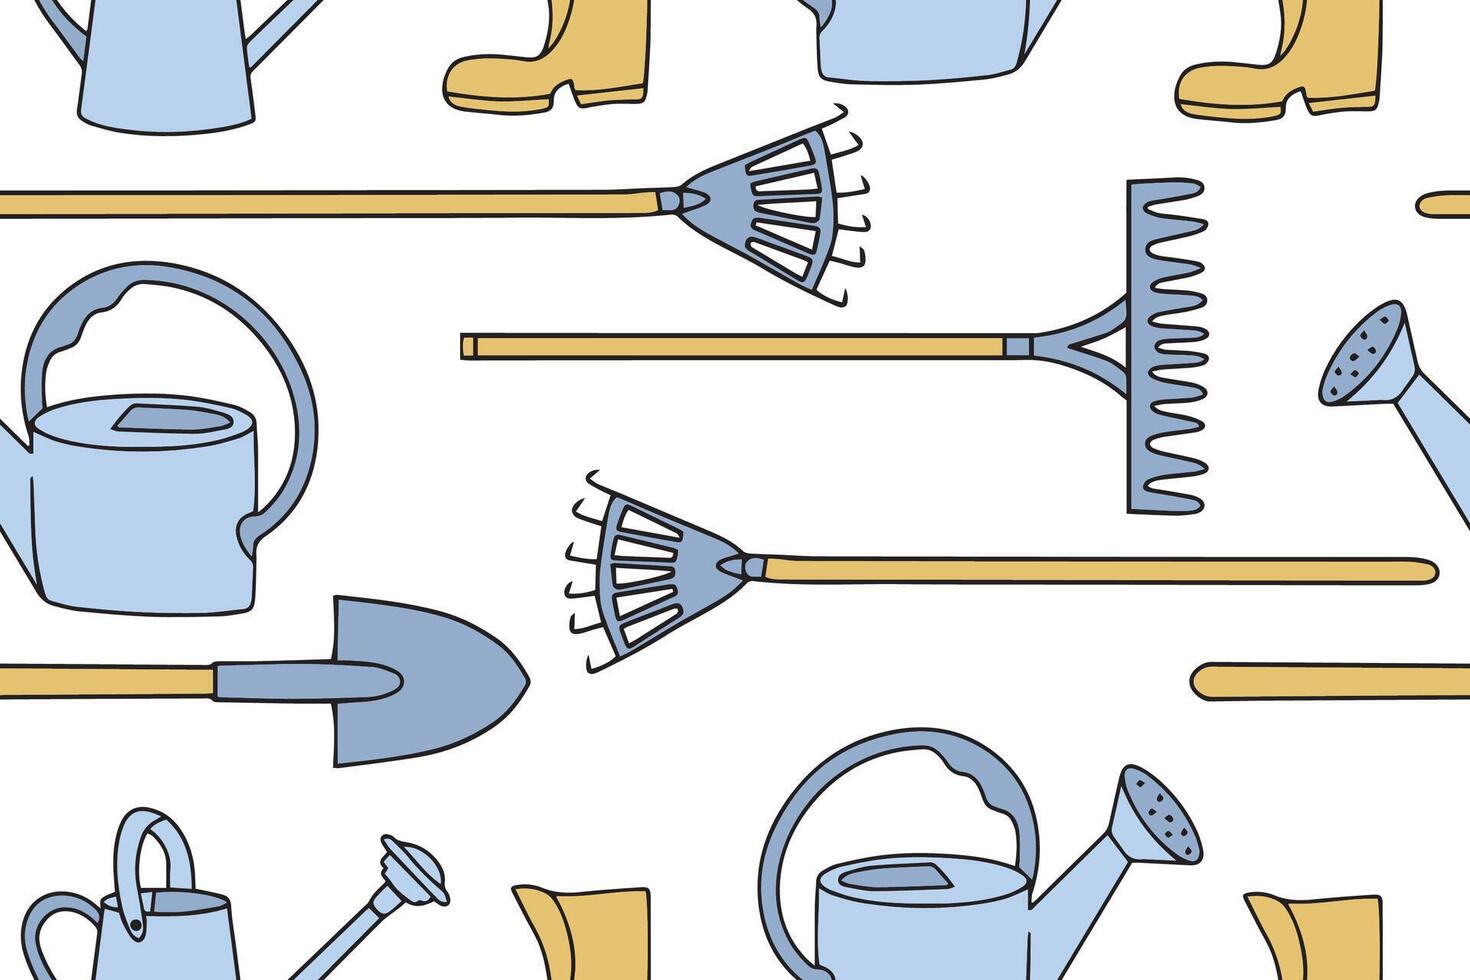 Gardening hand drawn seamless pattern, doodle ornament of gardening tools icons, vector illustration of shovel, watering can. Vector